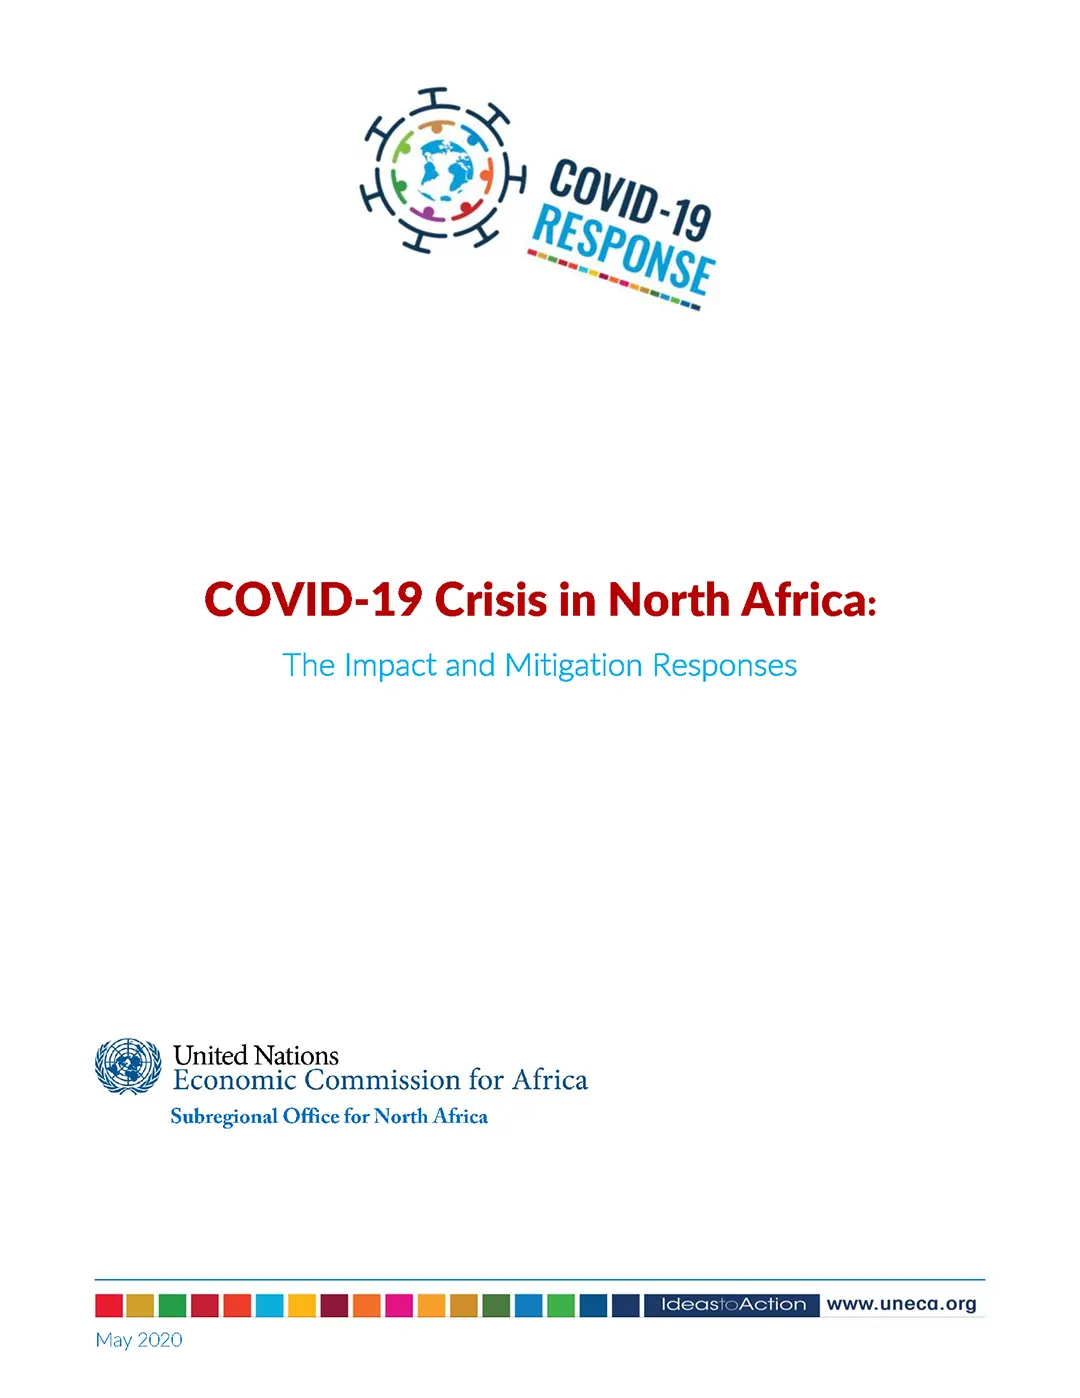 COVID-19 Crisis in North Africa: The Impact and Mitigation Responses